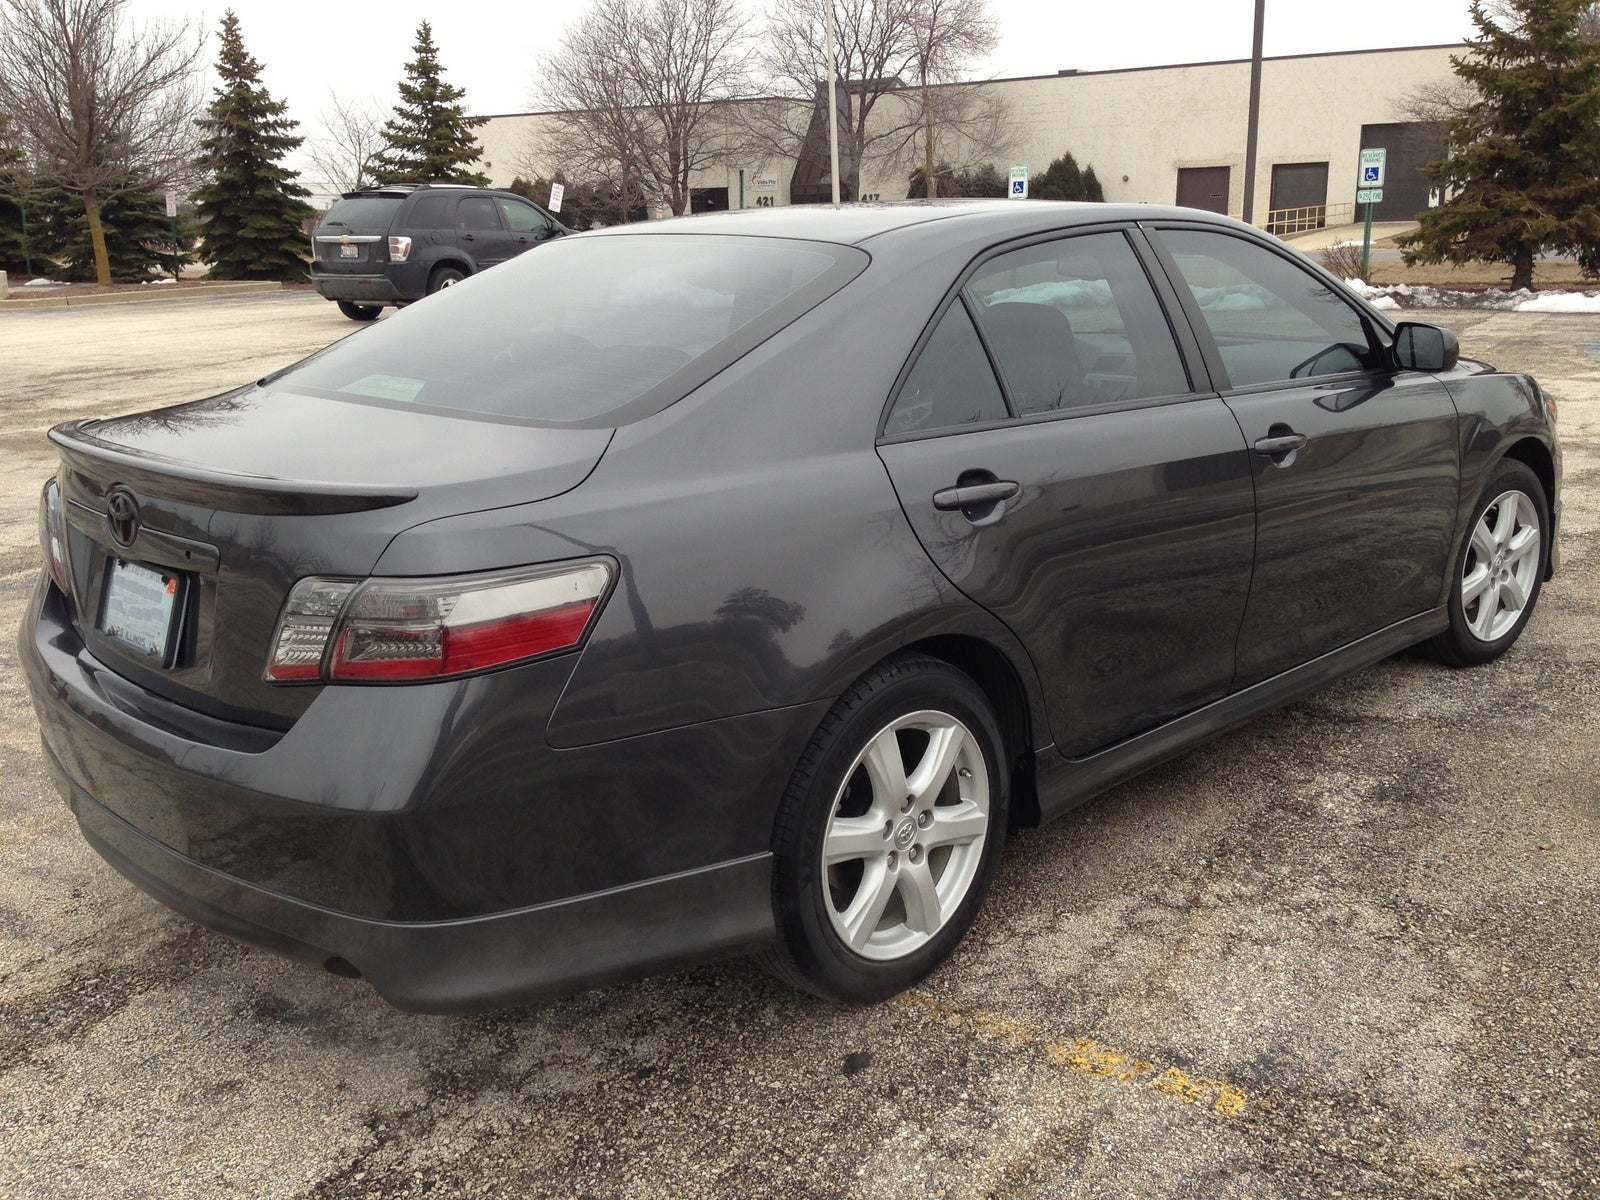 Picture of 2009 Toyota Camry SE V6, exterior